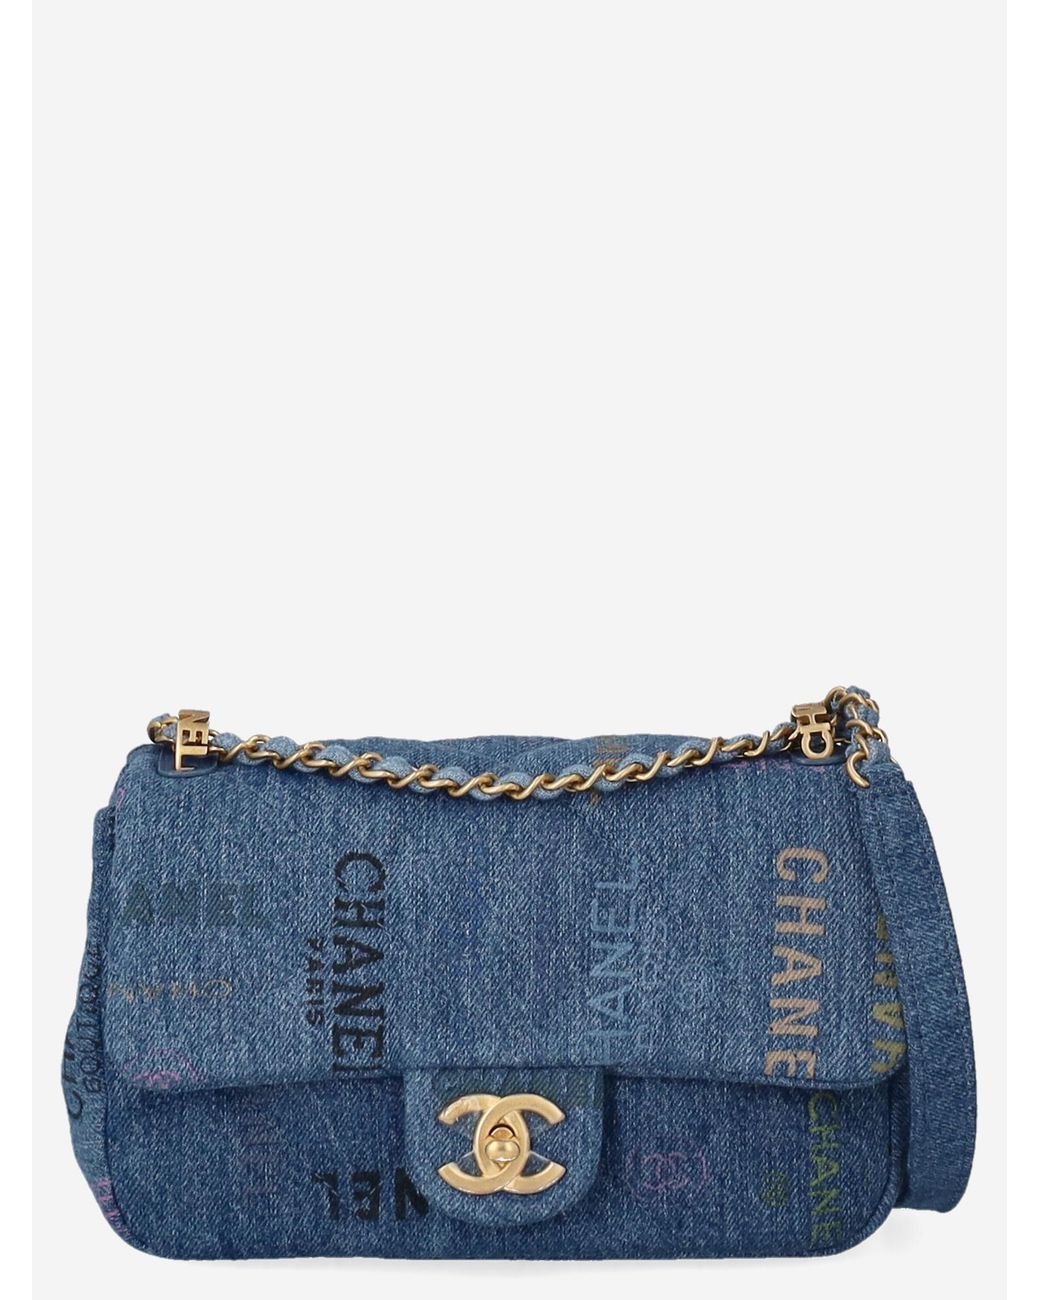 Chanel Bag Small Single Flap Quilted Denim in Blue